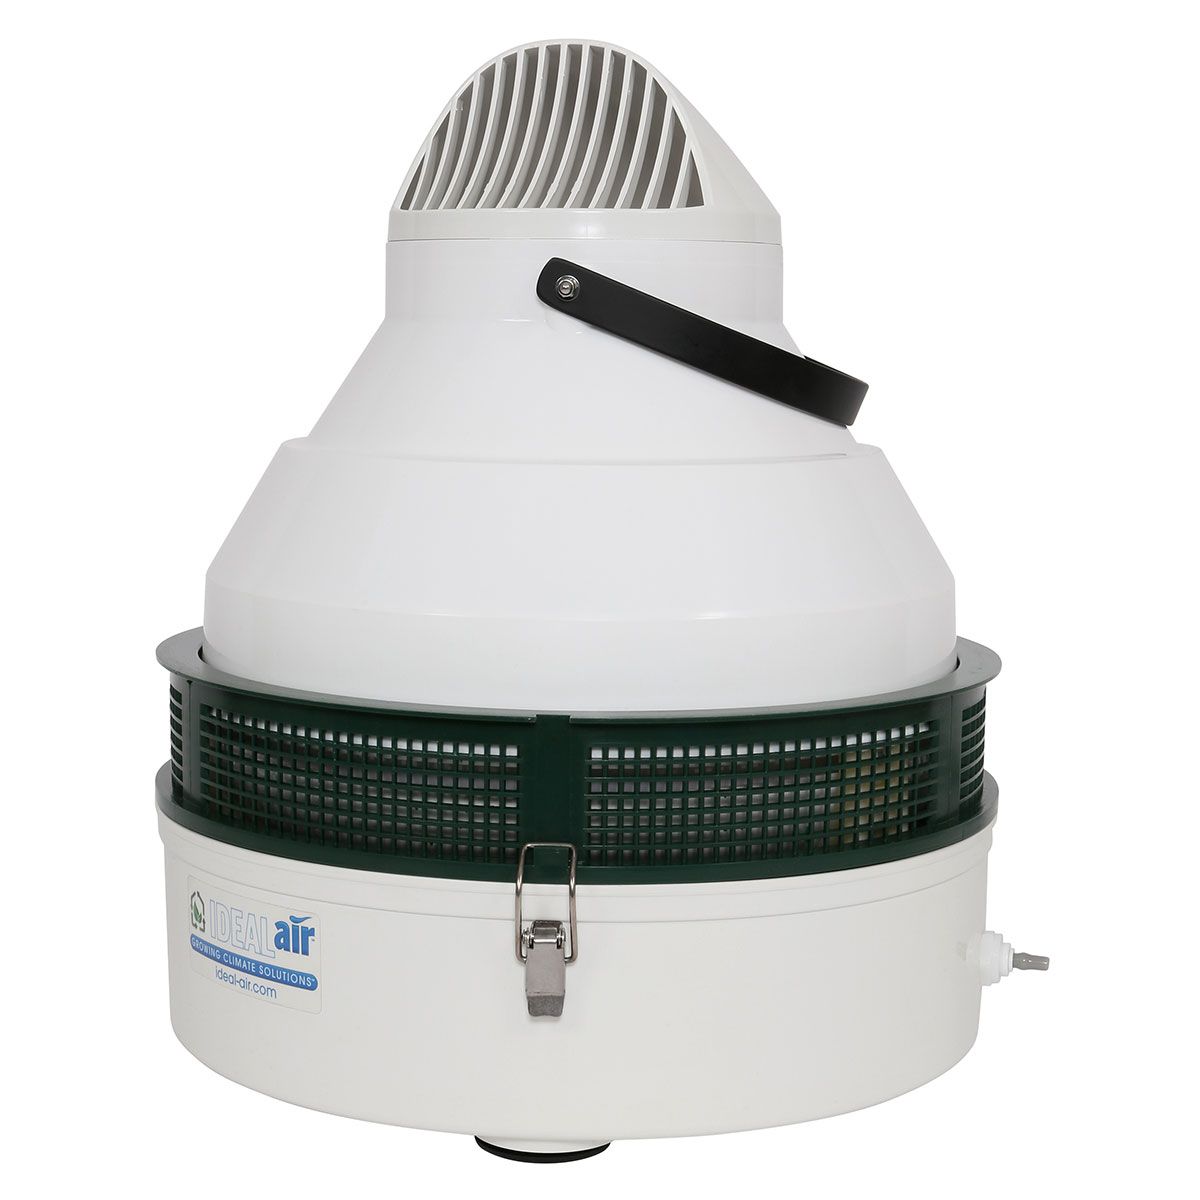 Product Secondary Image:Ideal-Air Industrial Grade Humidifier 200 Pint